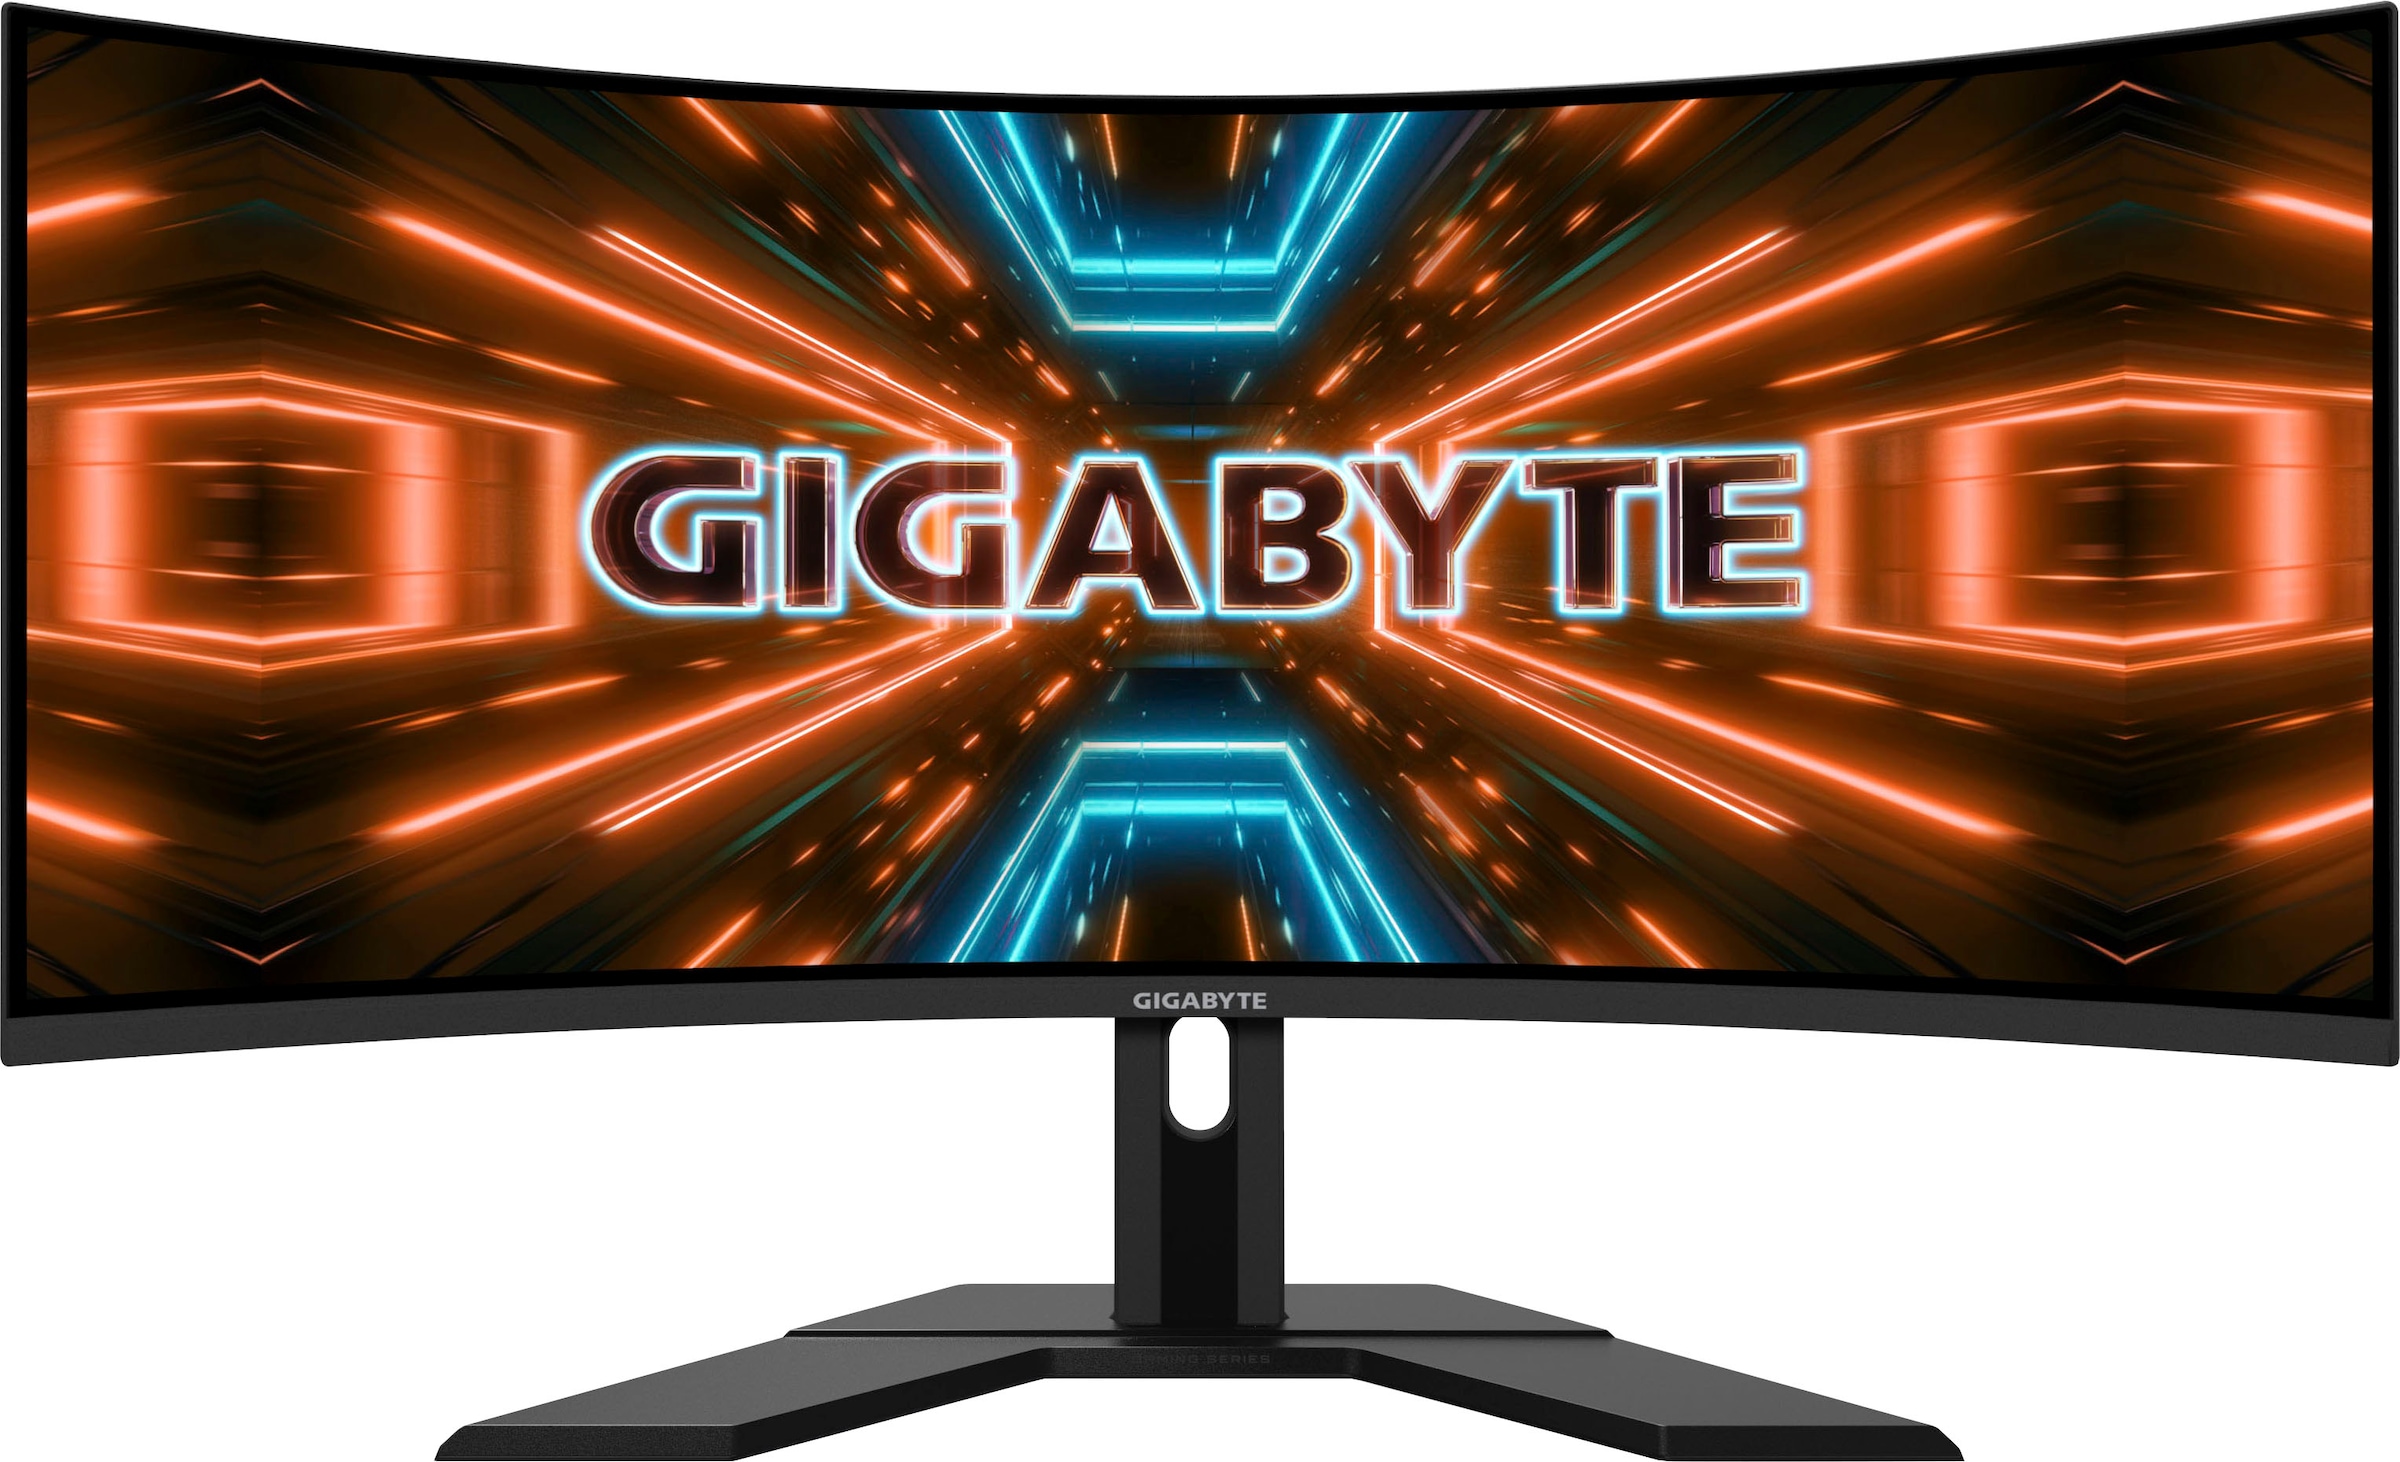 Gigabyte Curved-Gaming-LED-Monitor »G34WQC A«, 86 cm/34 Zoll, 3440 x 1440 px, QHD, 1 ms Reaktionszeit, 144 Hz